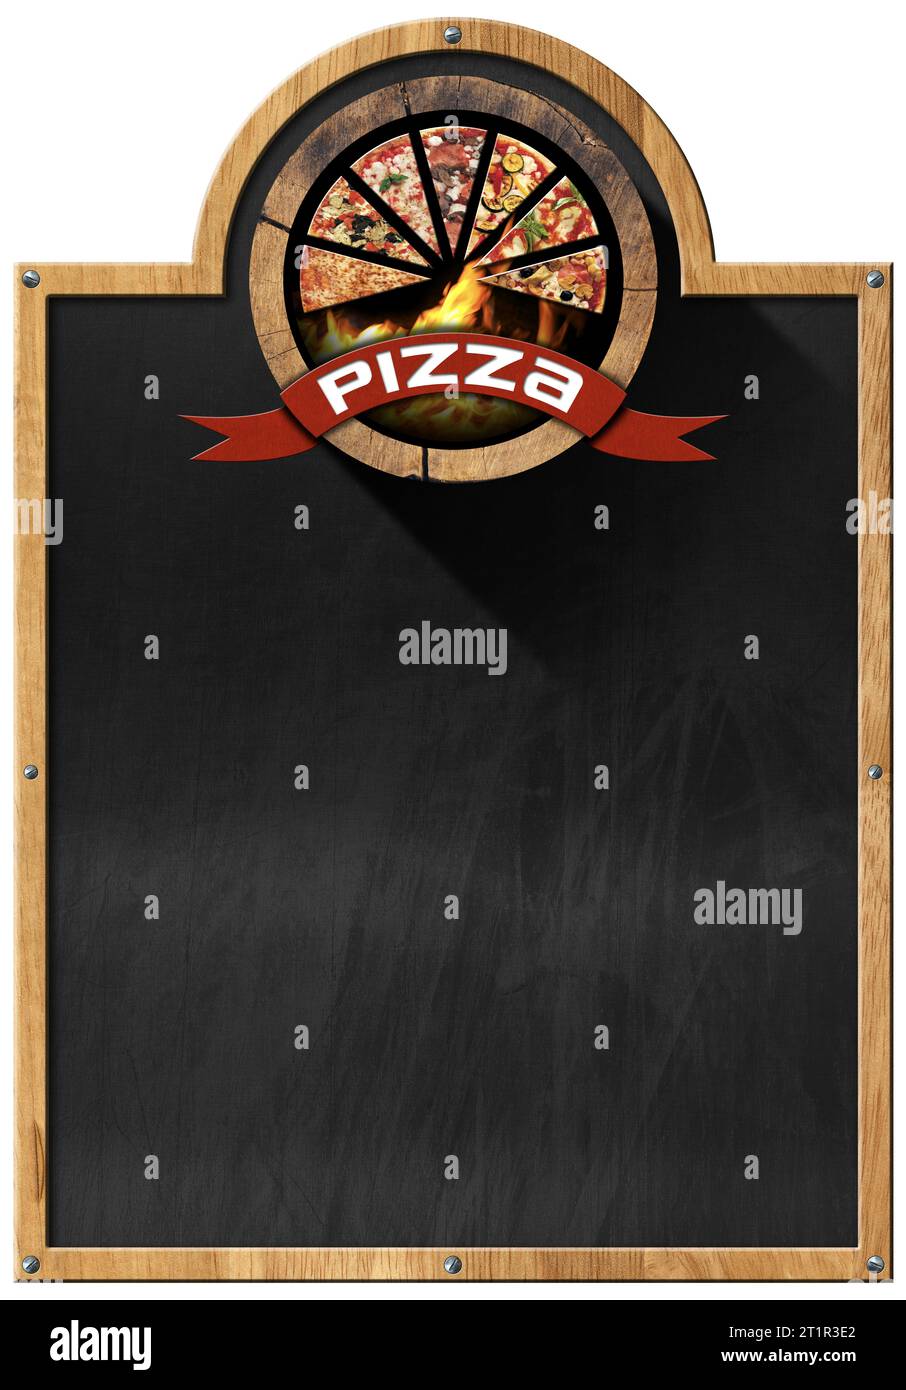 Template for a Pizza Menu. Wooden frame and symbol with slices of pizza, flames and red ribbon with text pizza, empty blackboard, isolated on white. Stock Photo